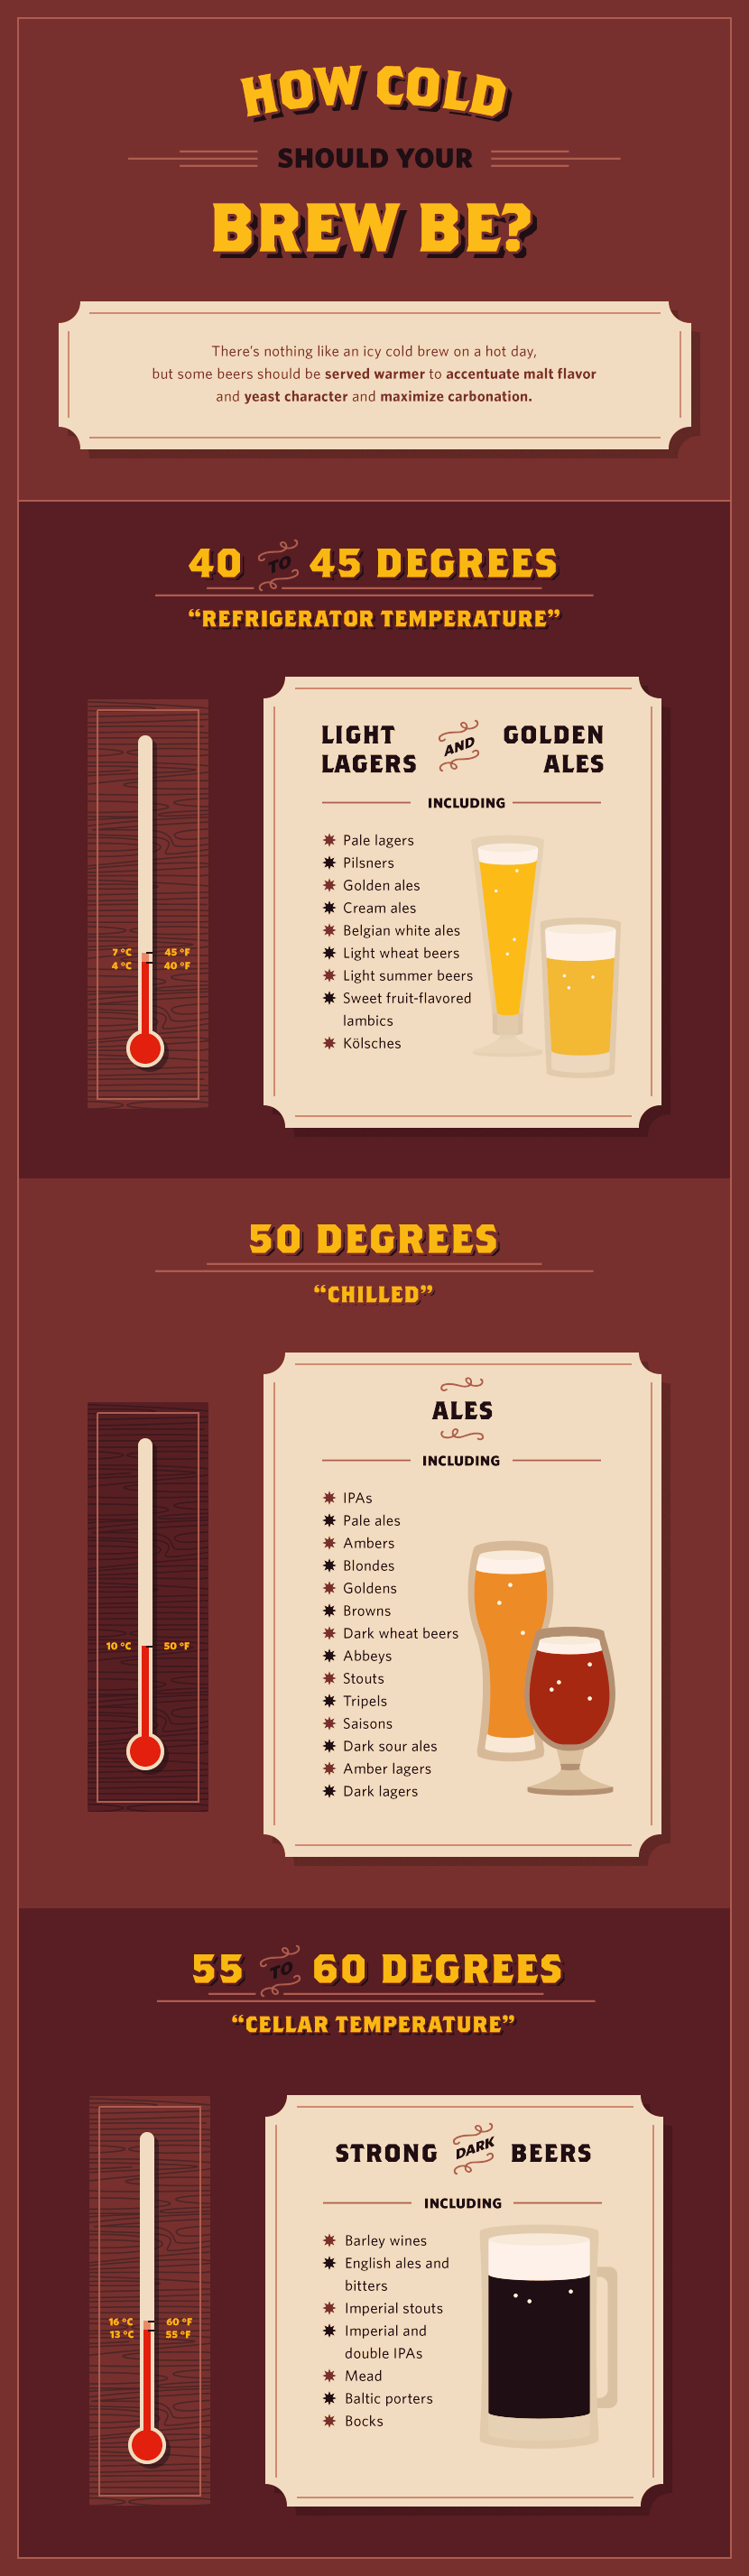 How Cold Should Your Brew Be